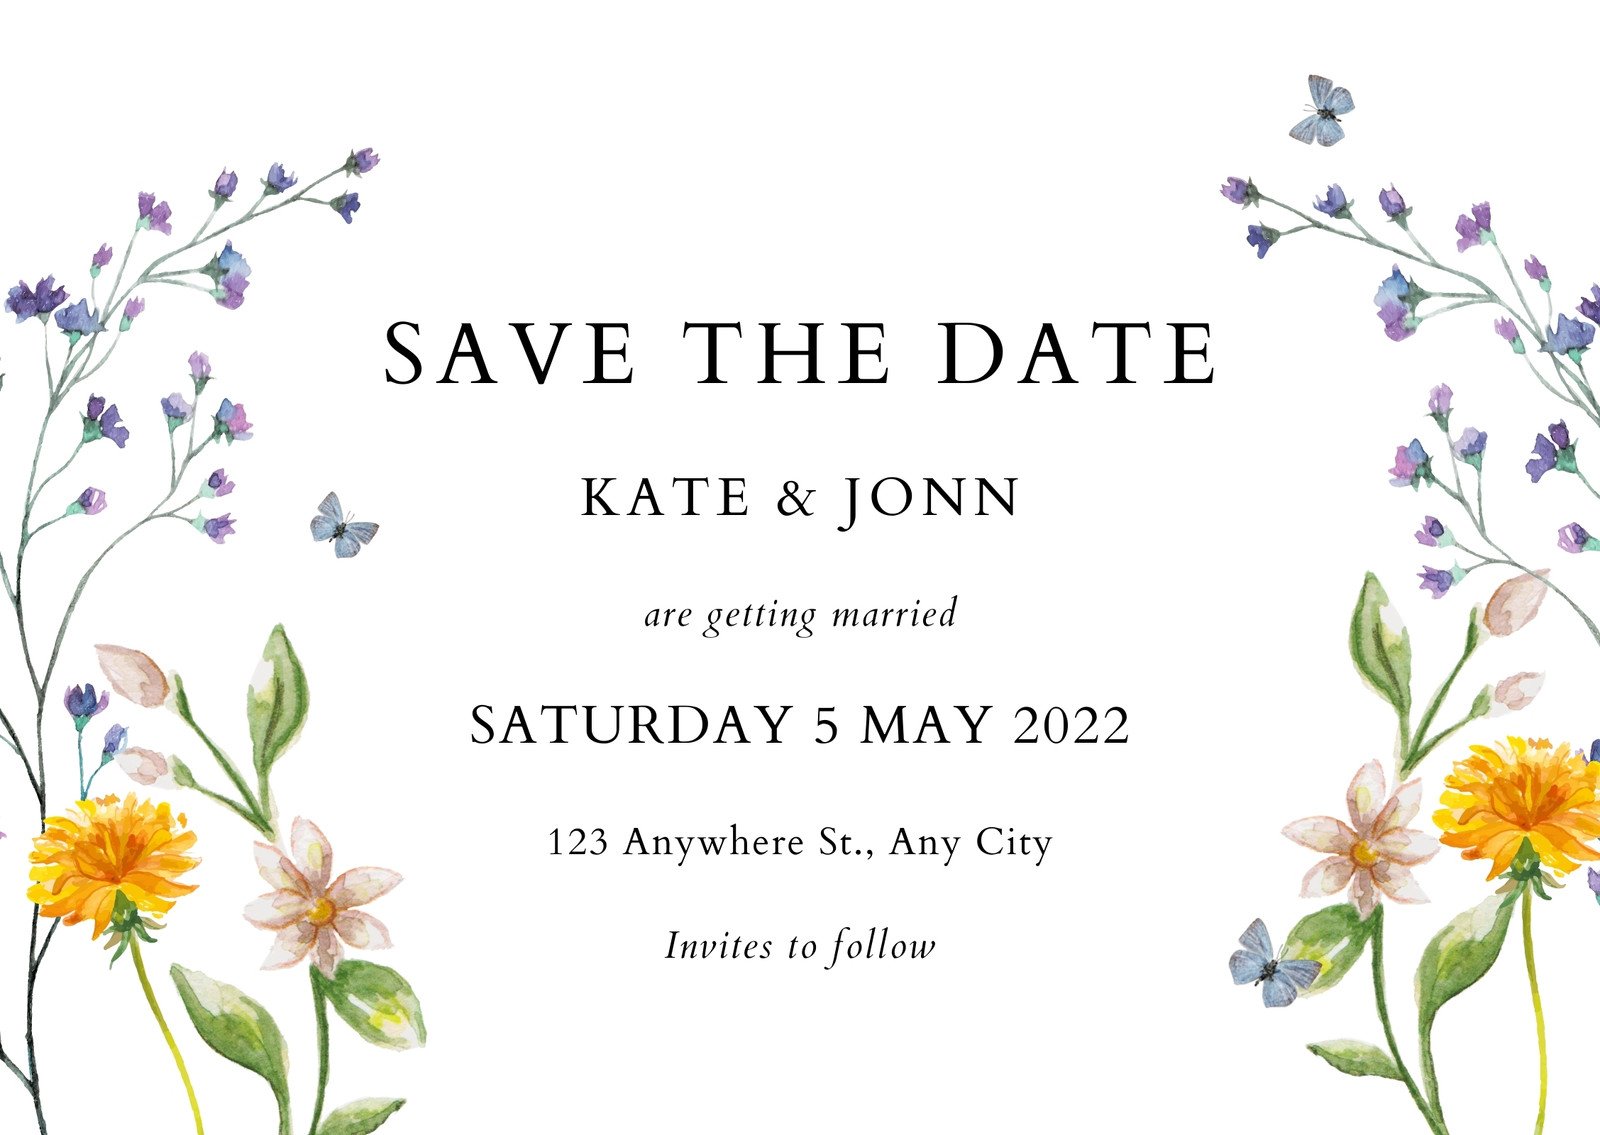 save the date postcard templates